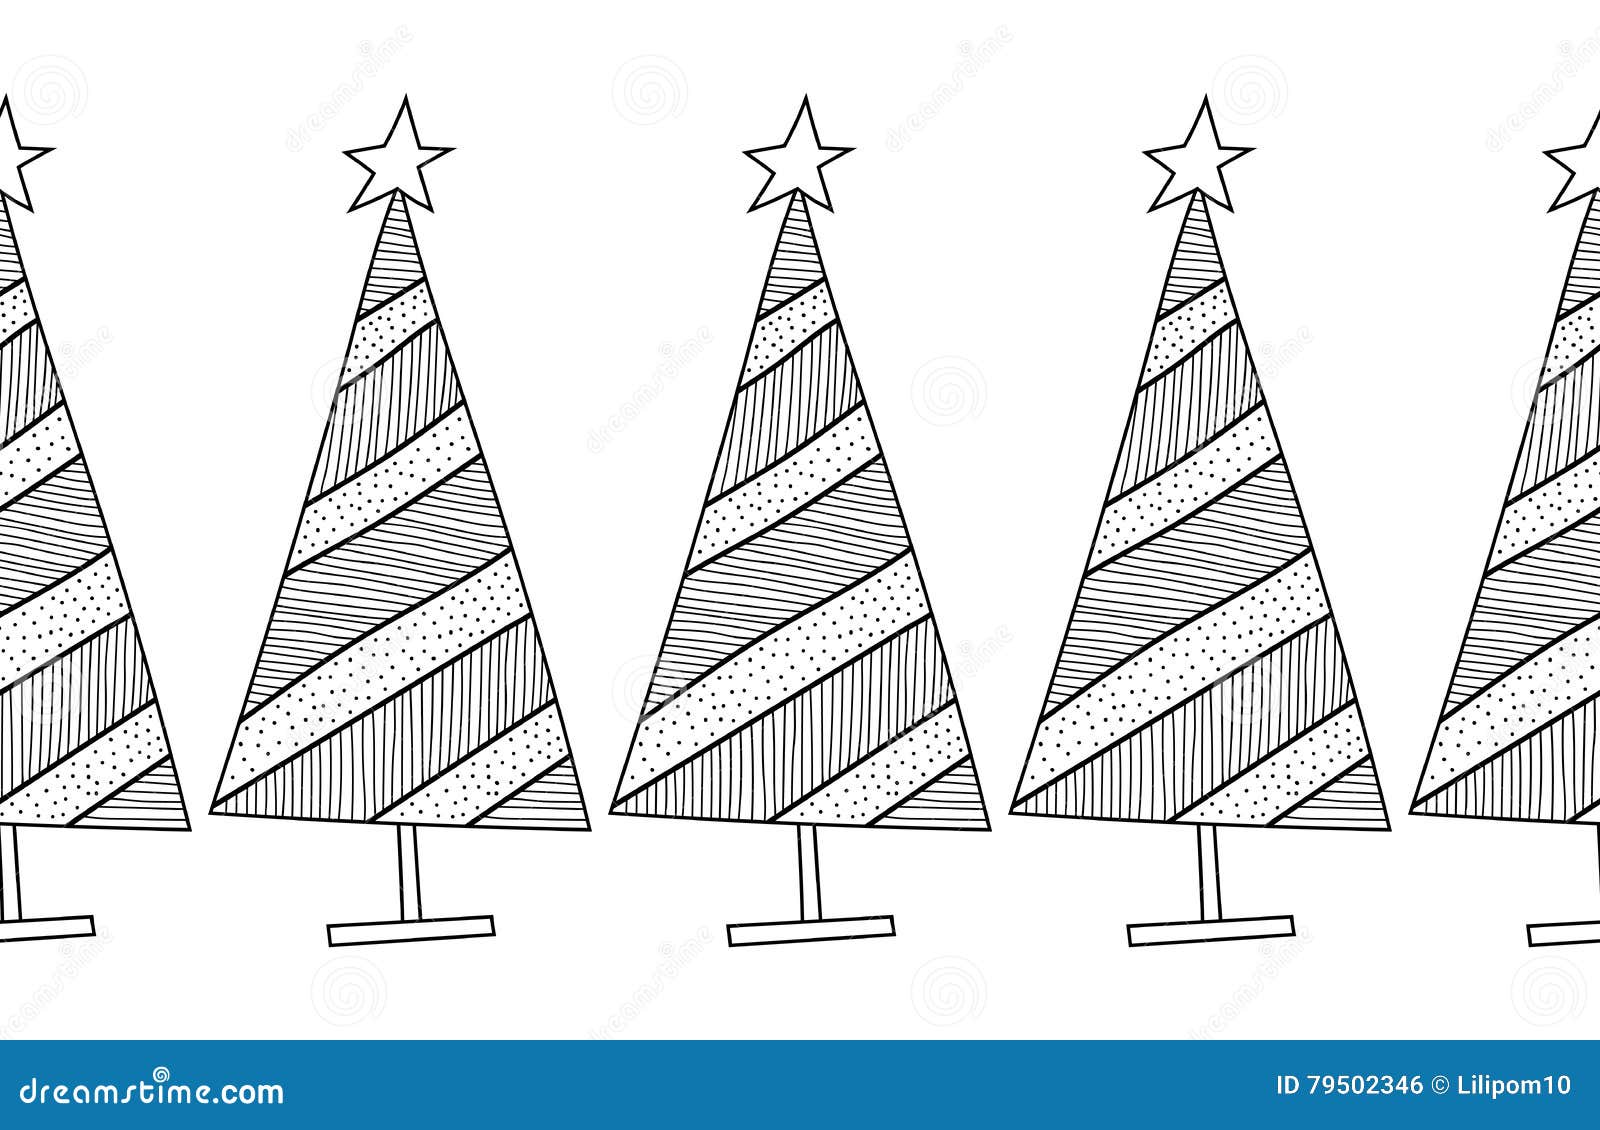 Black and White Seamless Pattern with Christmas Trees for Coloring ...